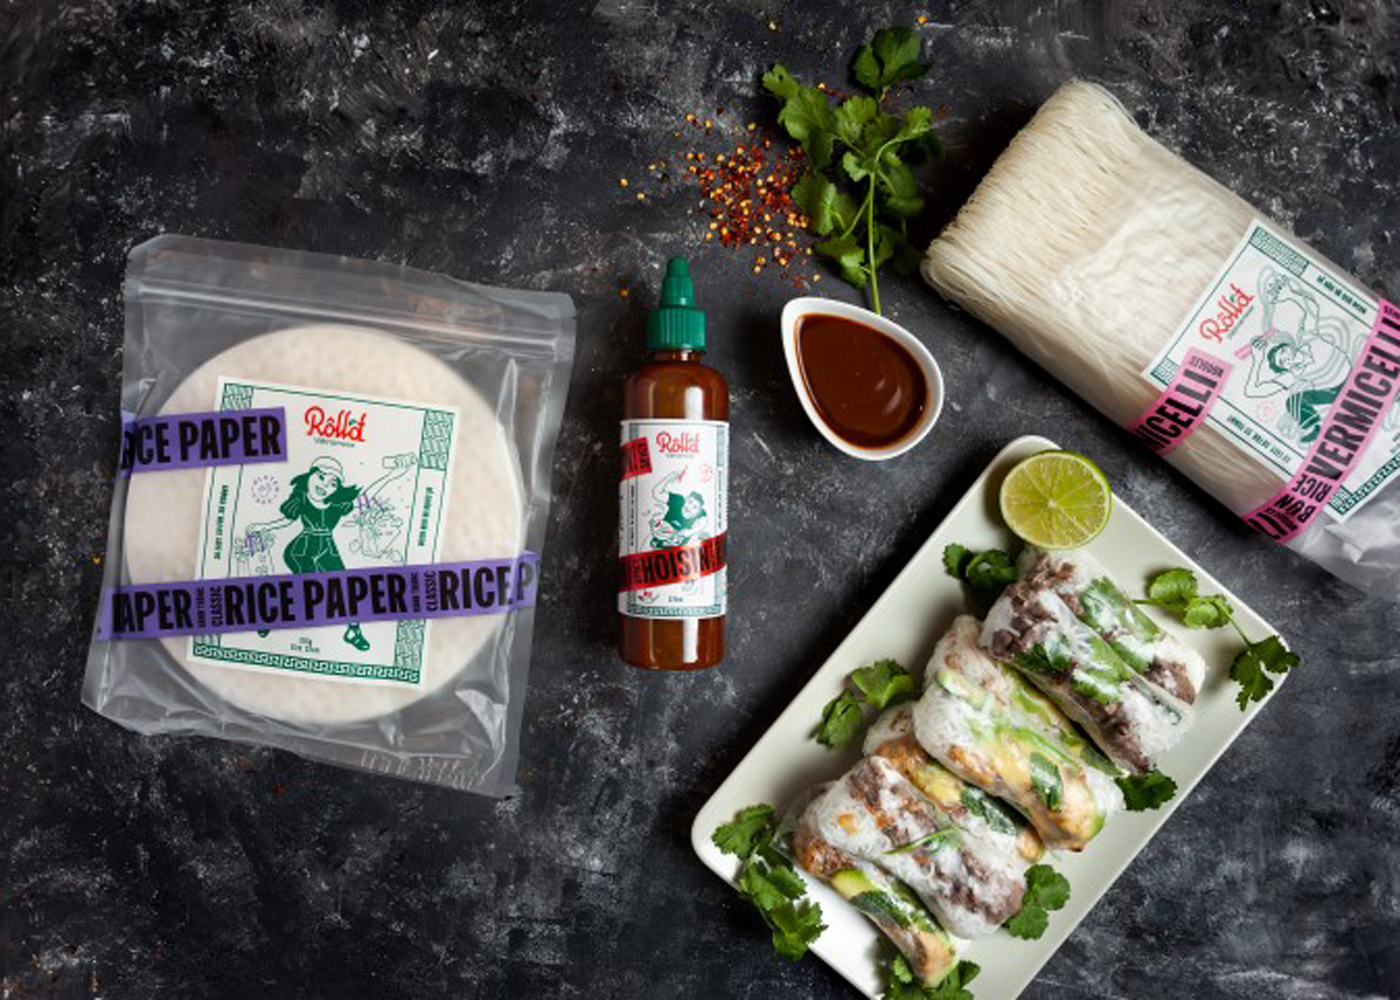 Roll’d Vietnamese launches pantry items and special sauces to create its much-loved rice paper rolls at home